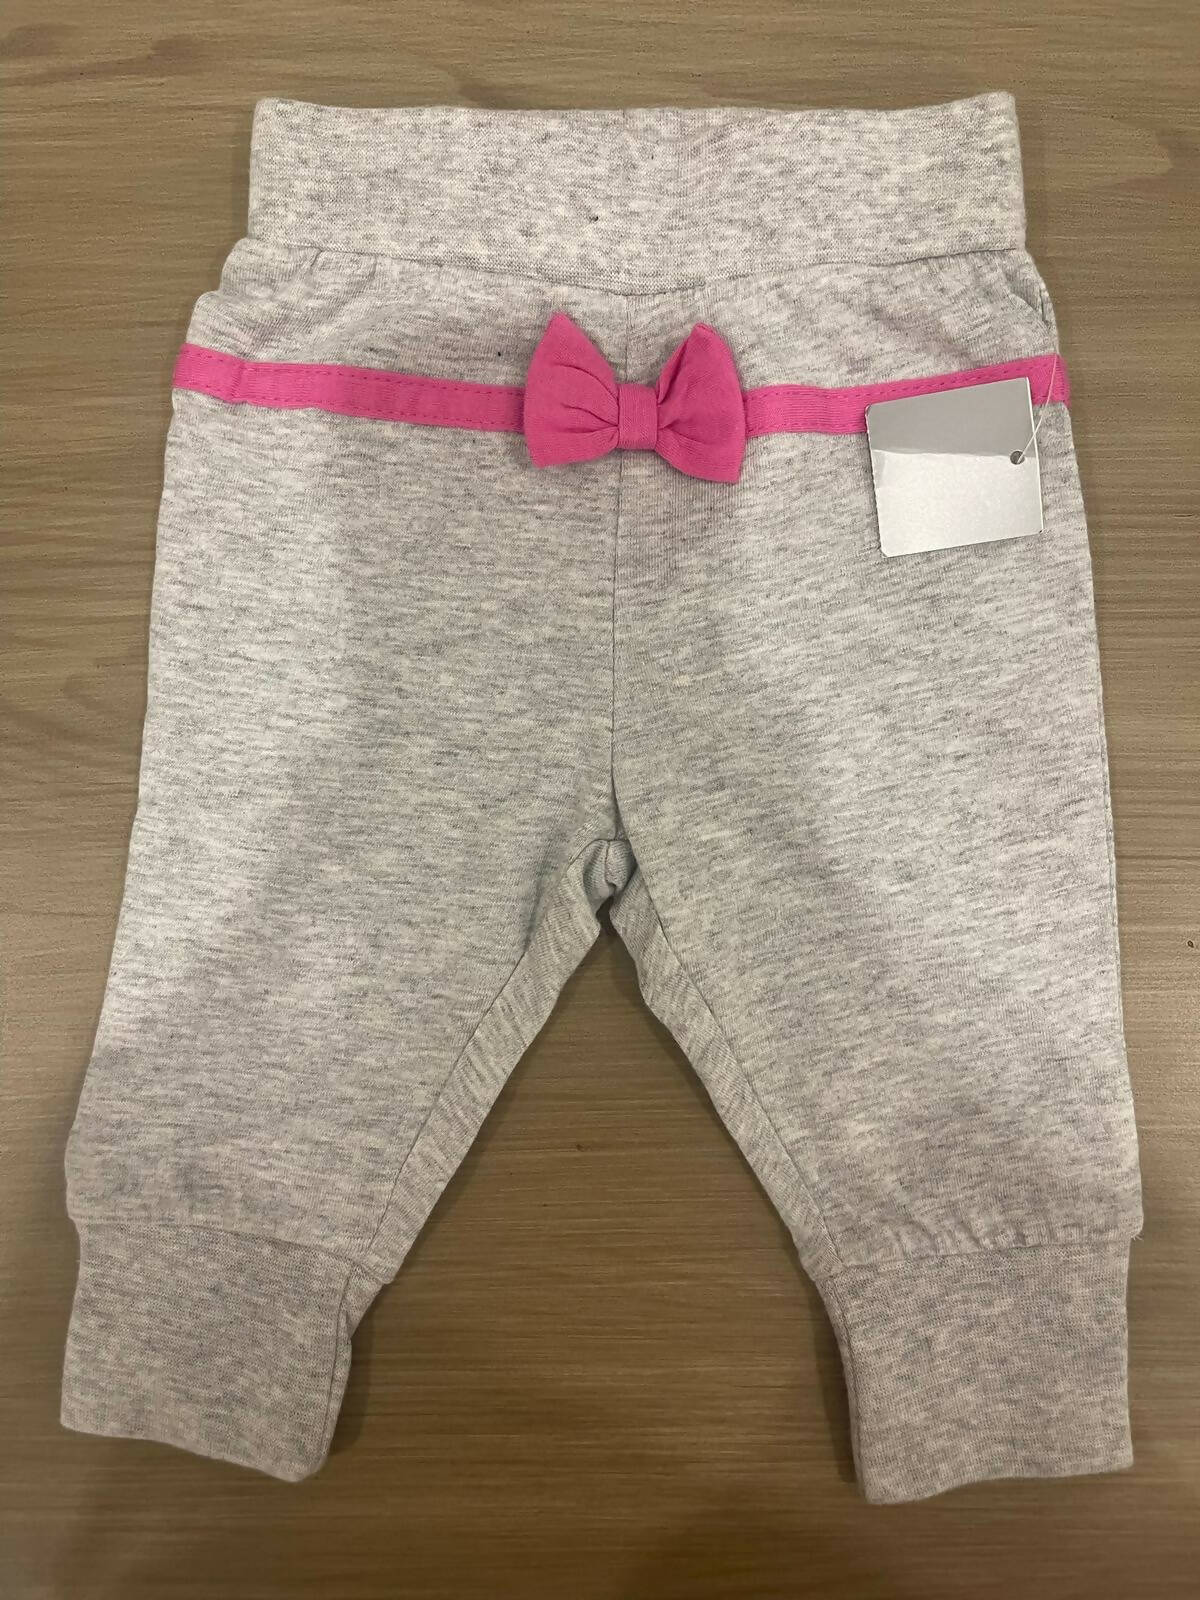 Macy's | Pink & Grey Pack of 2 Pants 0-3 months | Kids Bottoms | Brand New